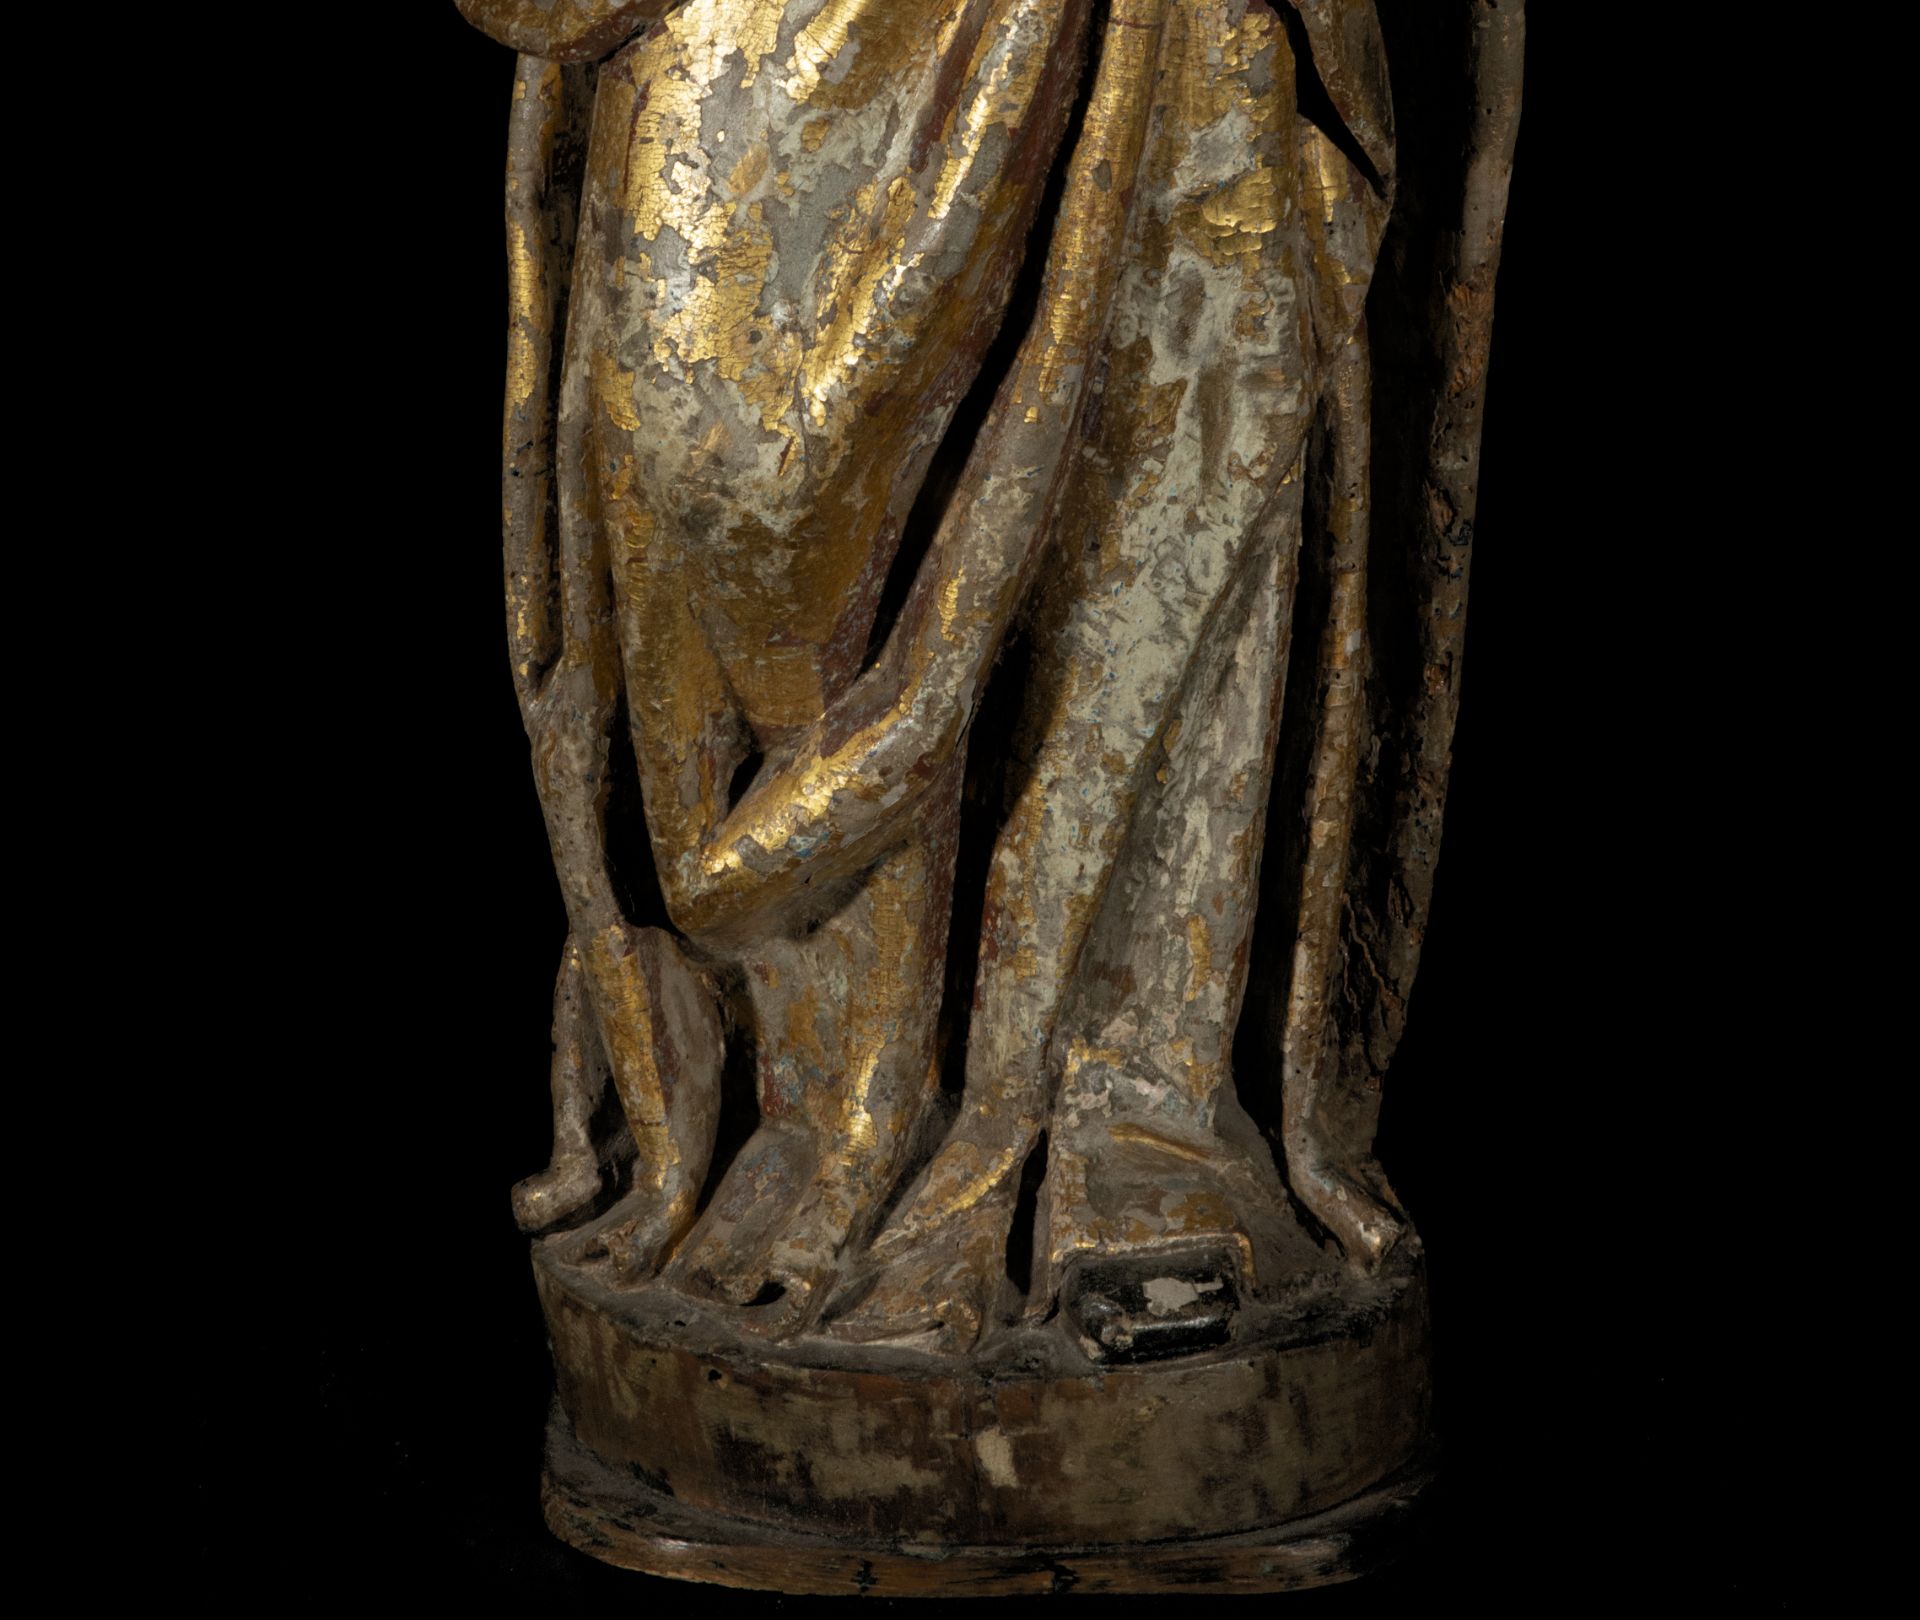 Brabant school of the 15th century - early 16th century, Great Virgin Sorrowful - Image 3 of 8